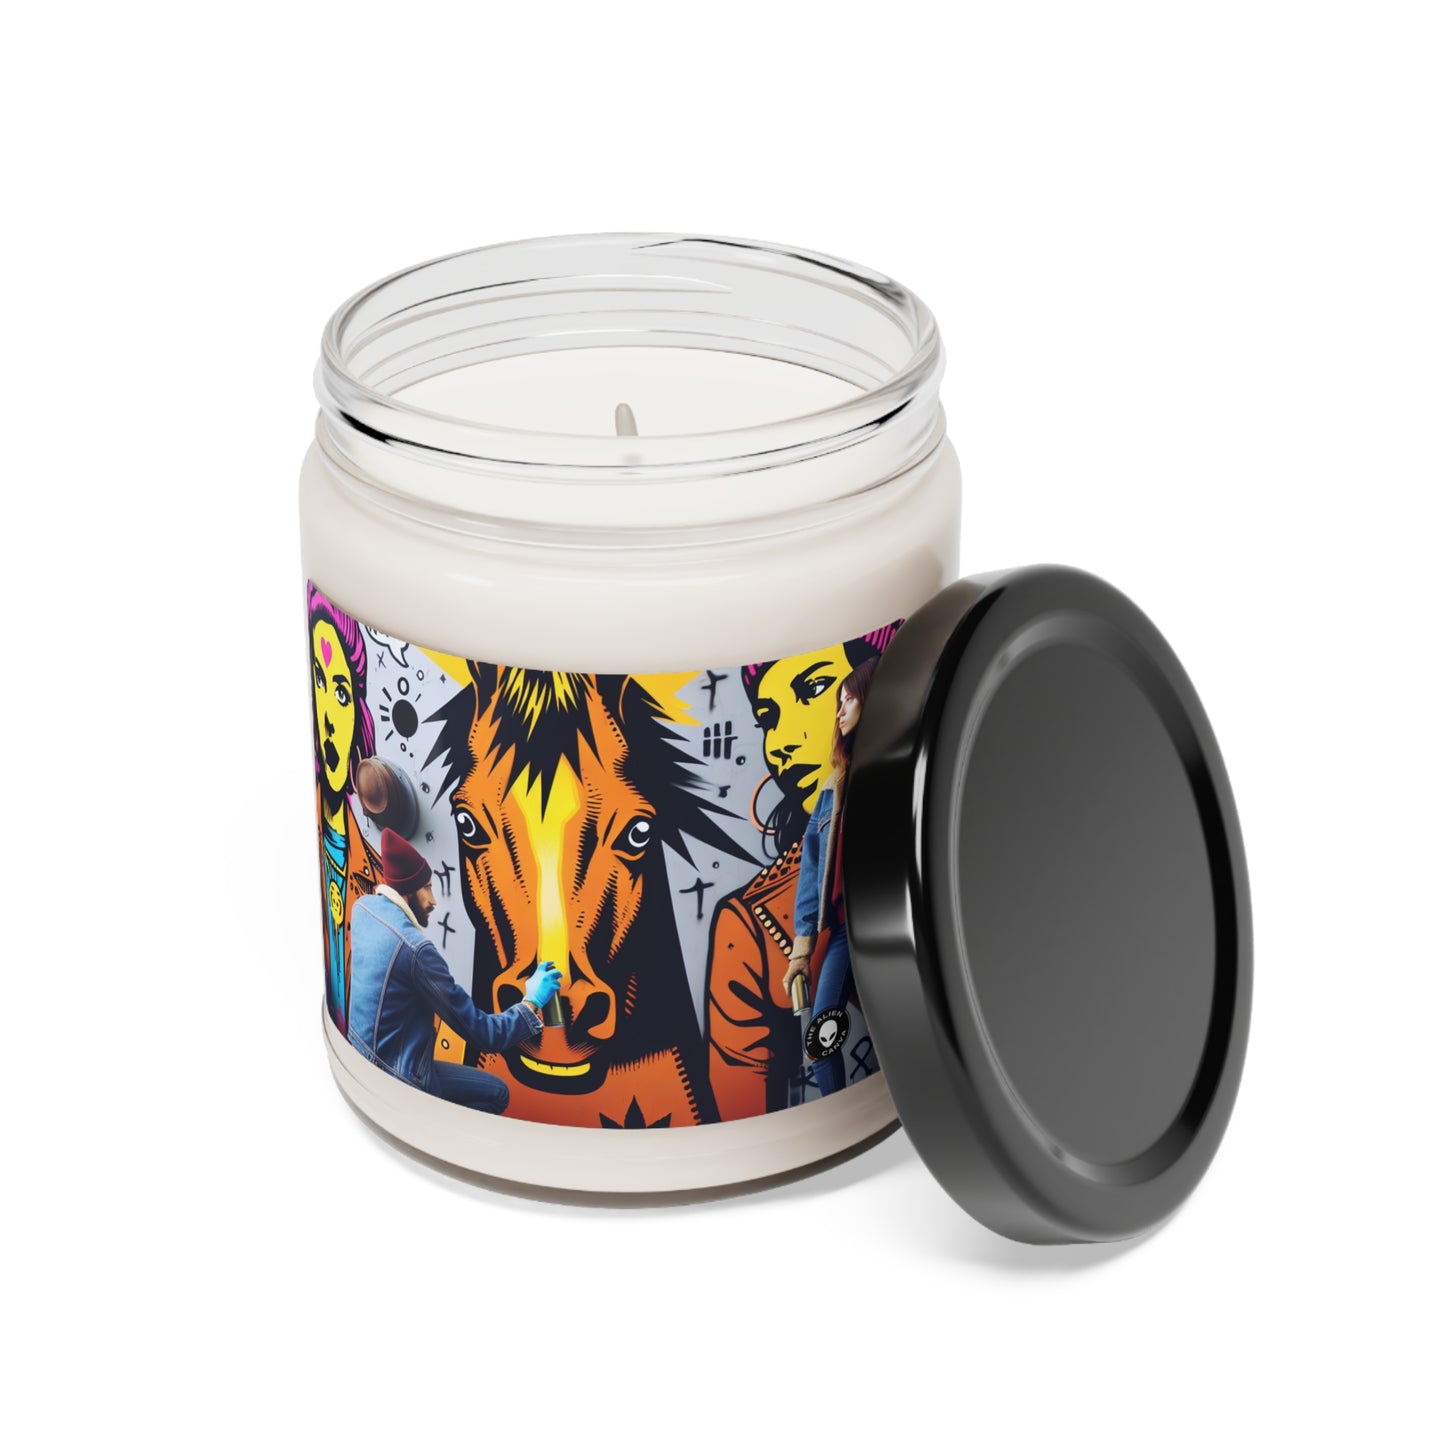 "Unity in Diversity: A Vibrant Street Art Mural" - The Alien Scented Soy Candle 9oz Street Art